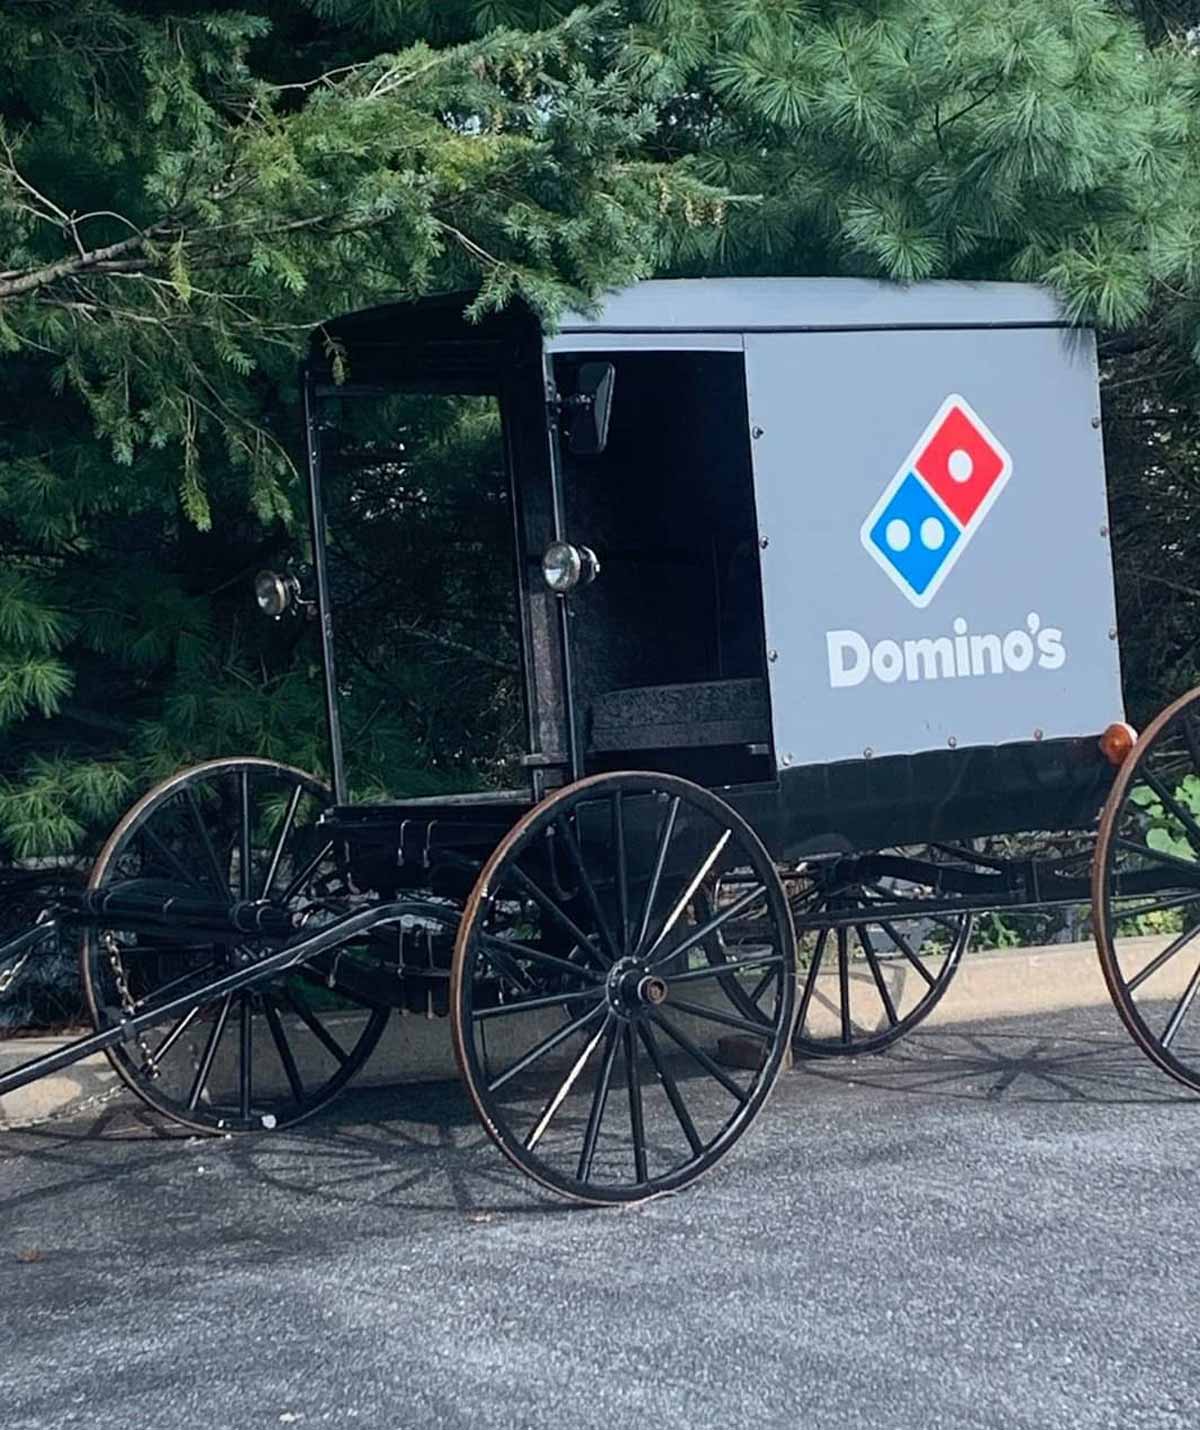 Parked at a Domino's pizza in Amish country, Lititz PA